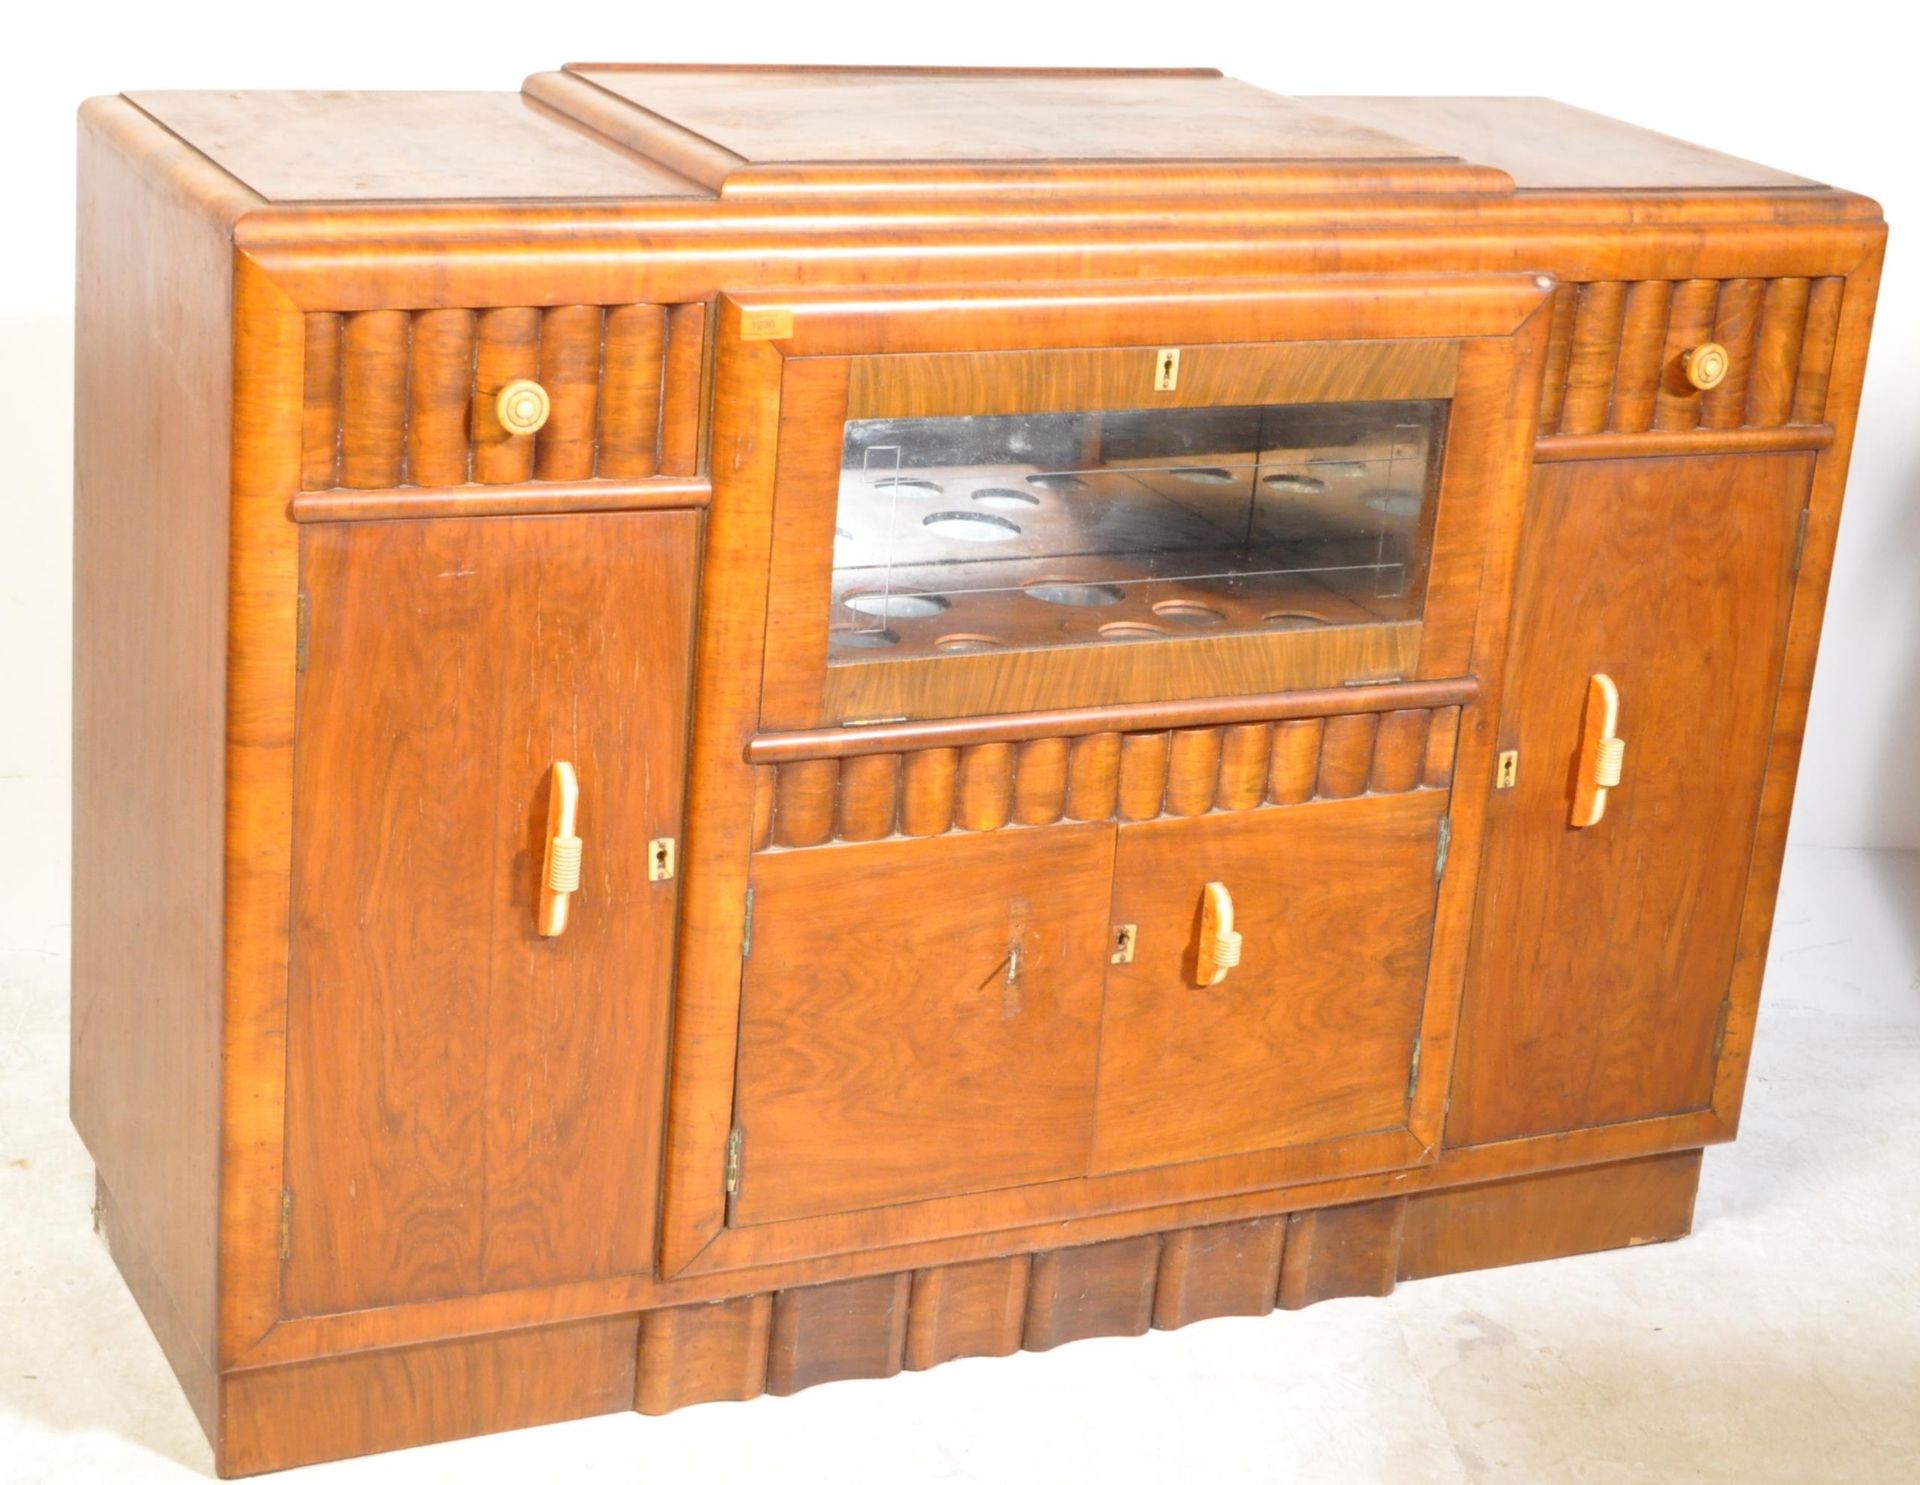 1930S ART DECO WALNUT COCKTAIL CABINET - Image 2 of 8